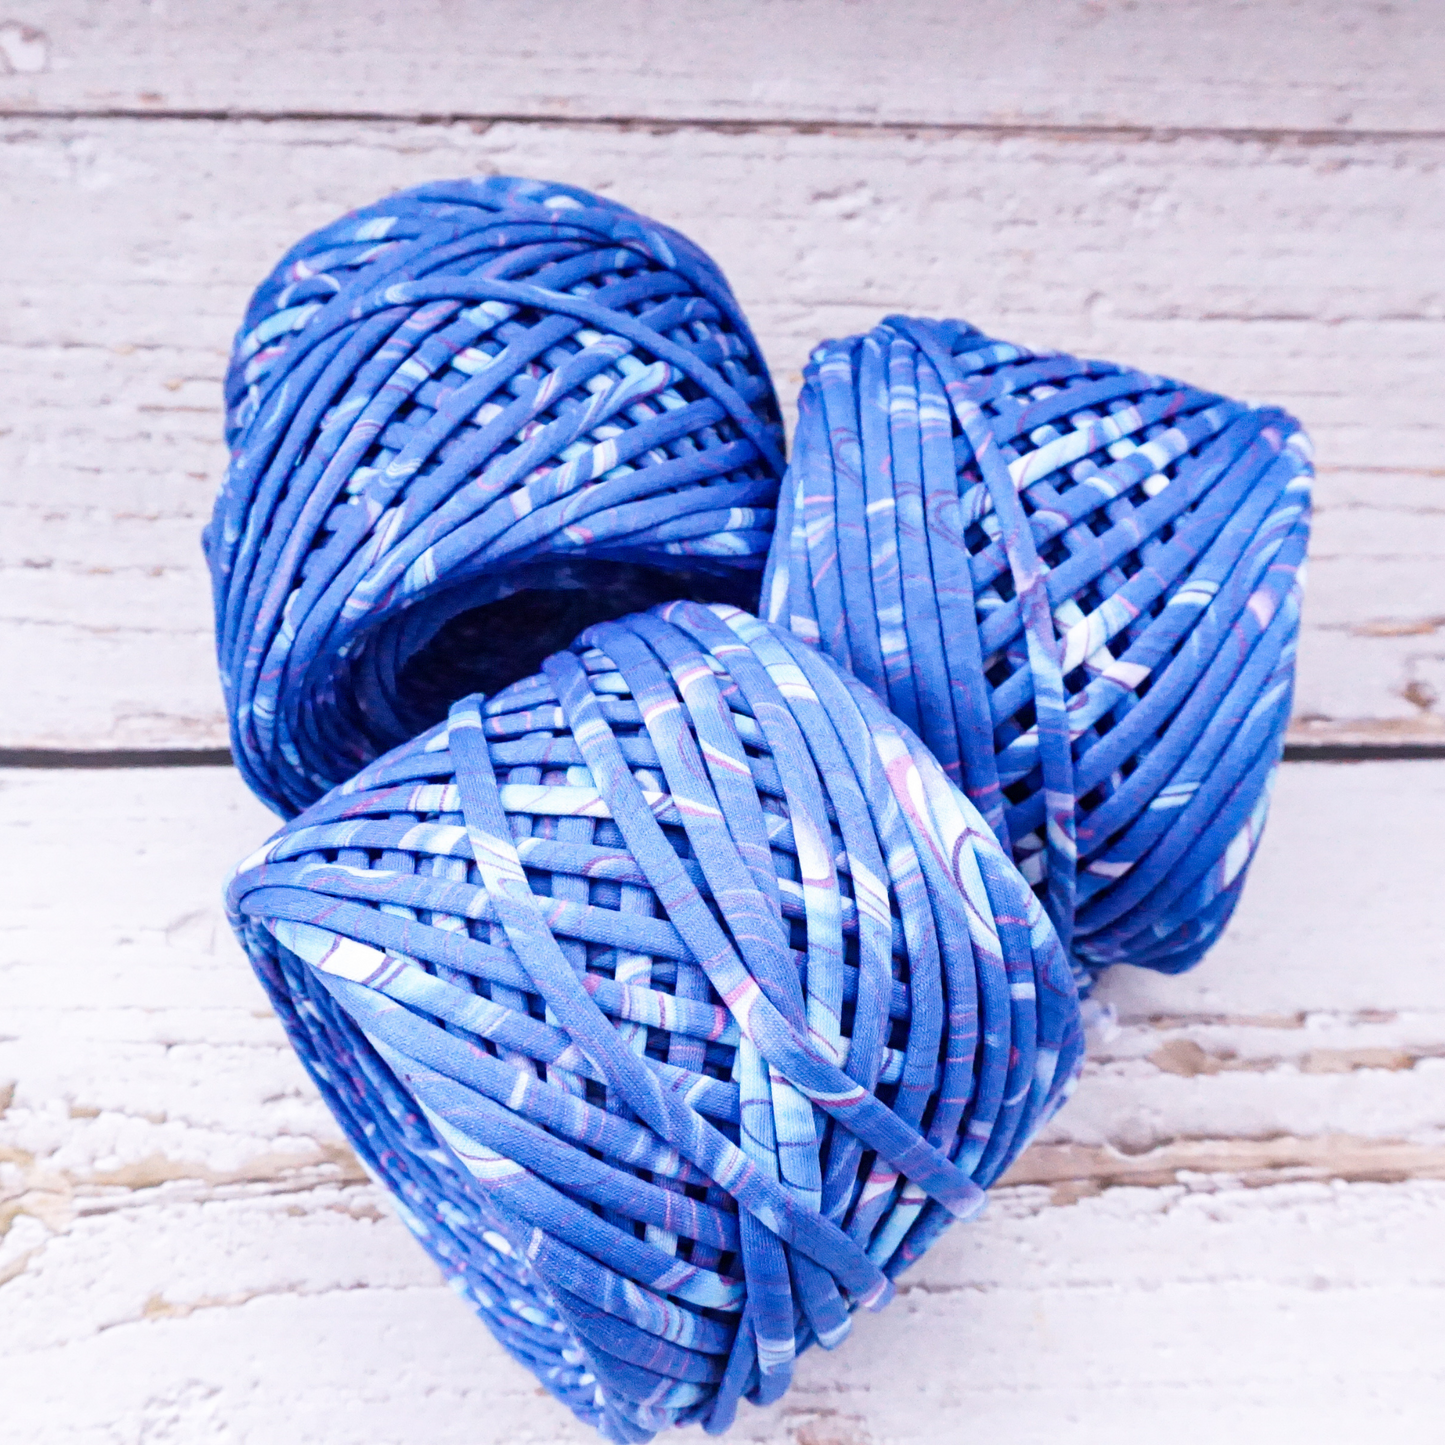 T-shirt yarn for crocheting baskets, bags, rugs and home decor. Blue cosmic